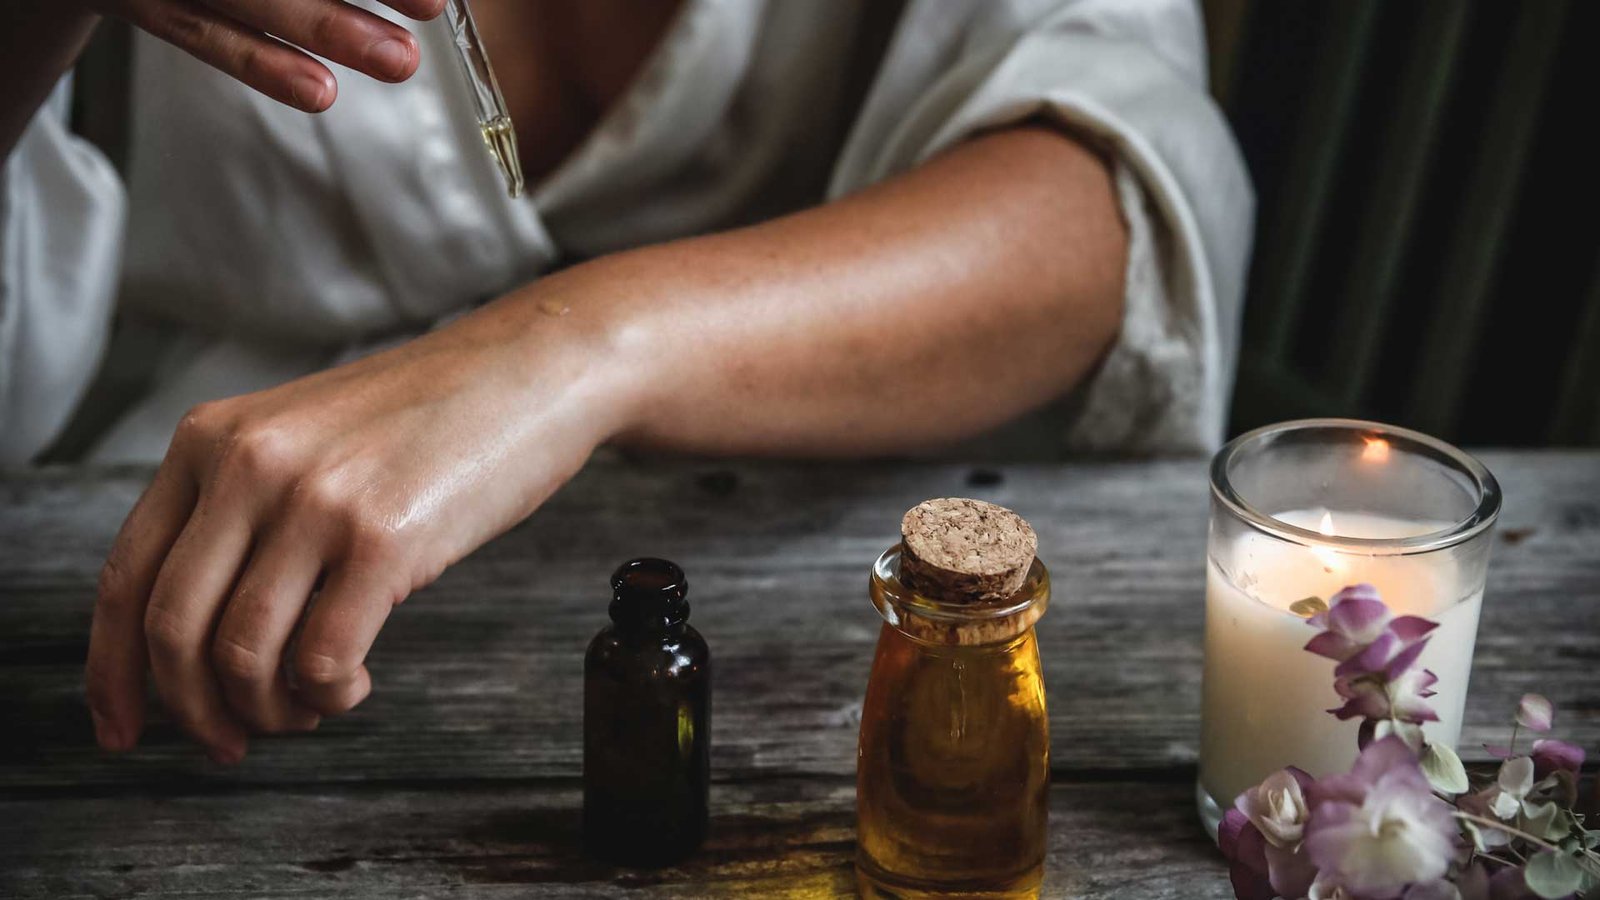 The 6 Incredible Benefits of Using Essential Oils for Aromatherapy